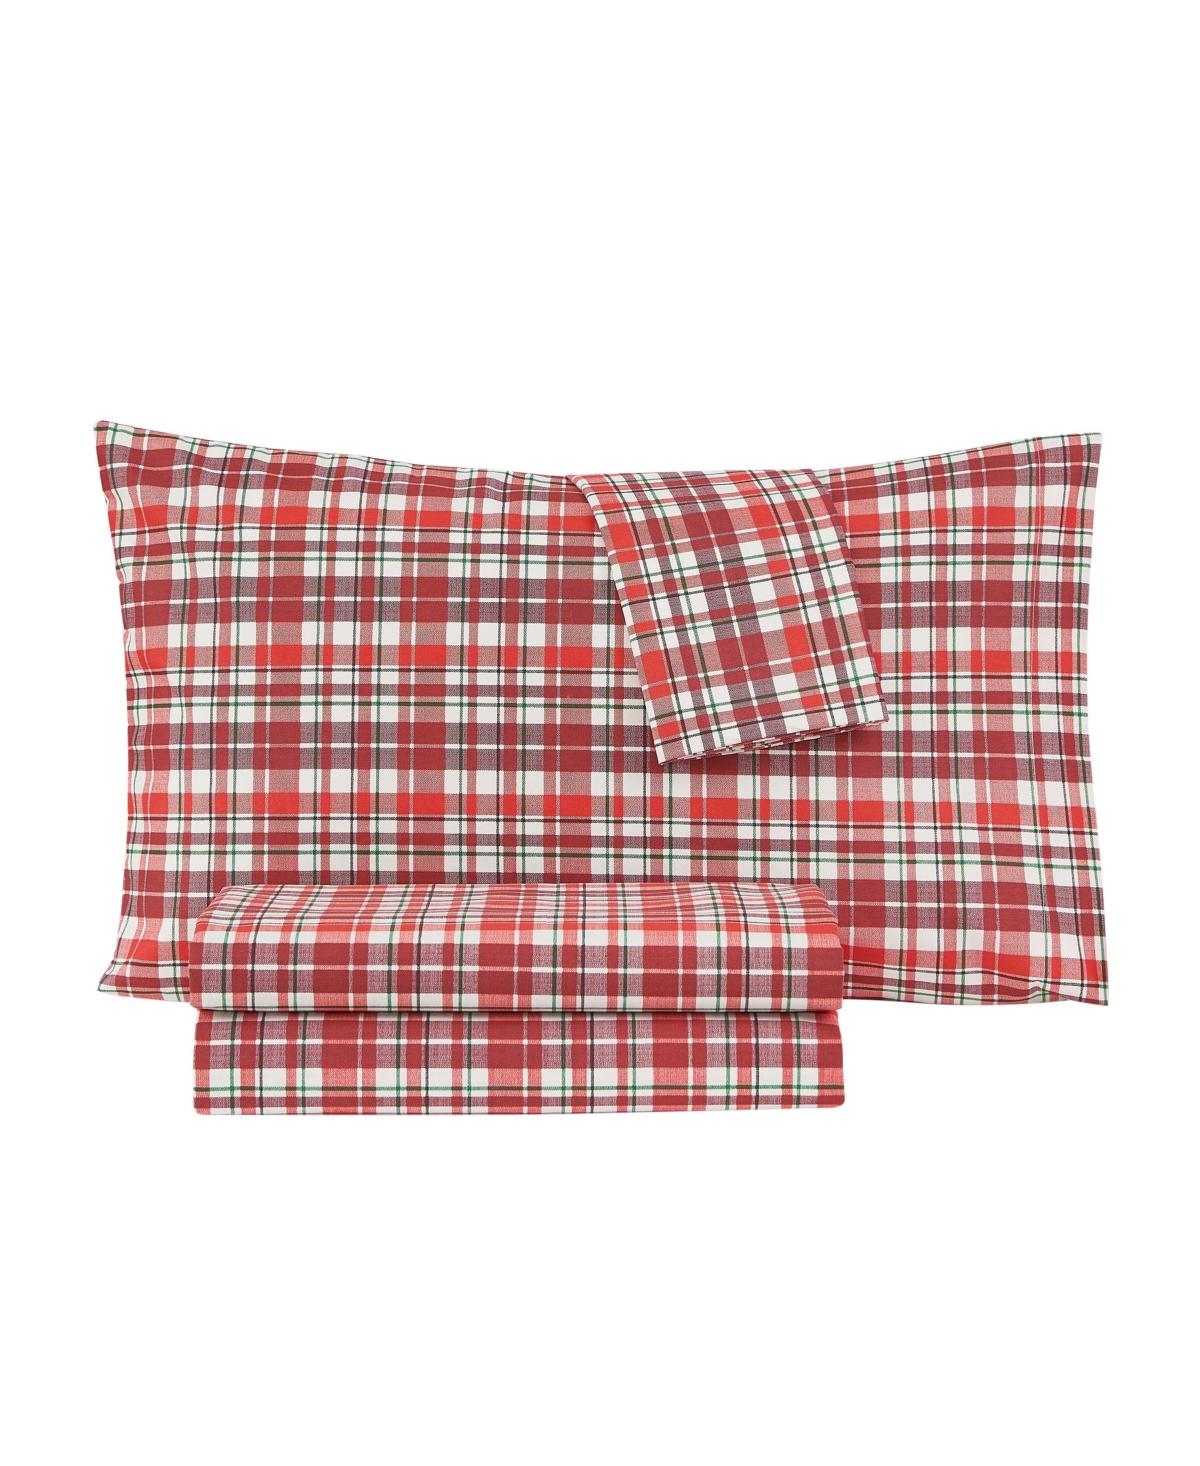 Jessica Sanders Holiday Microfiber 4 Pc Queen Sheet Set Bedding In Red Plaid